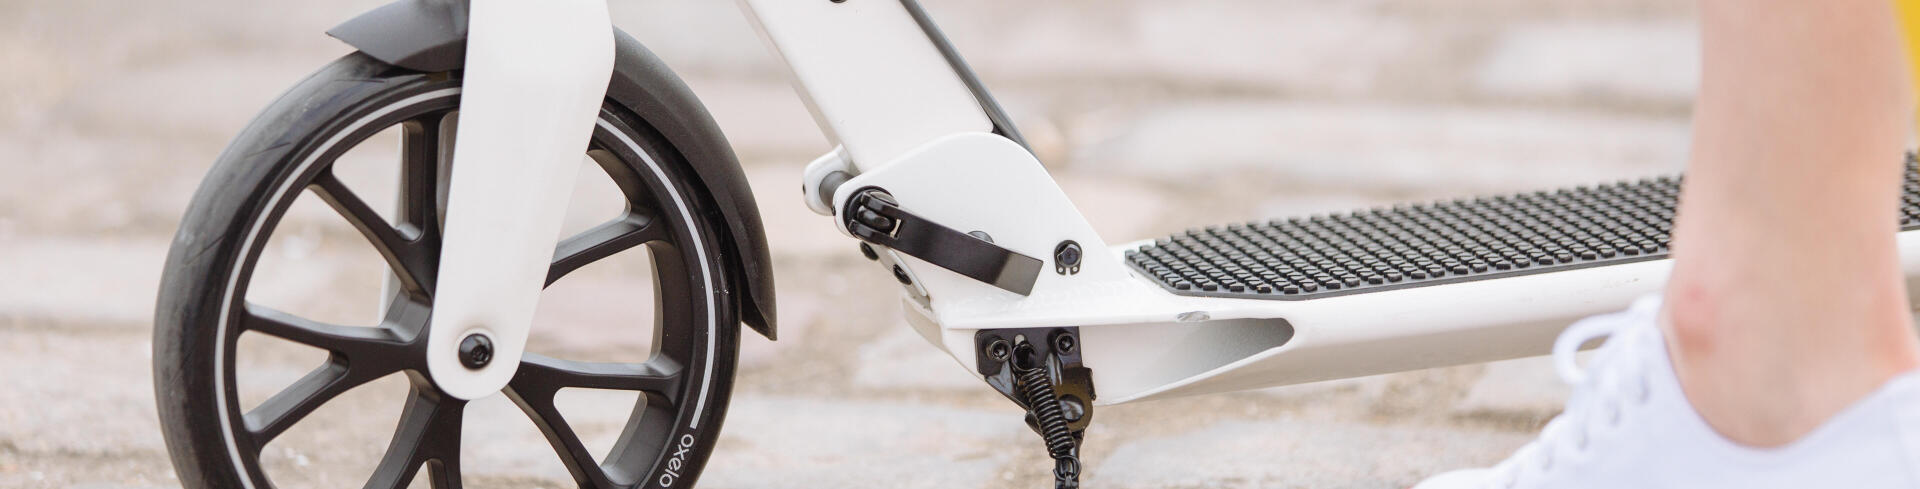 close-up of a town scooter